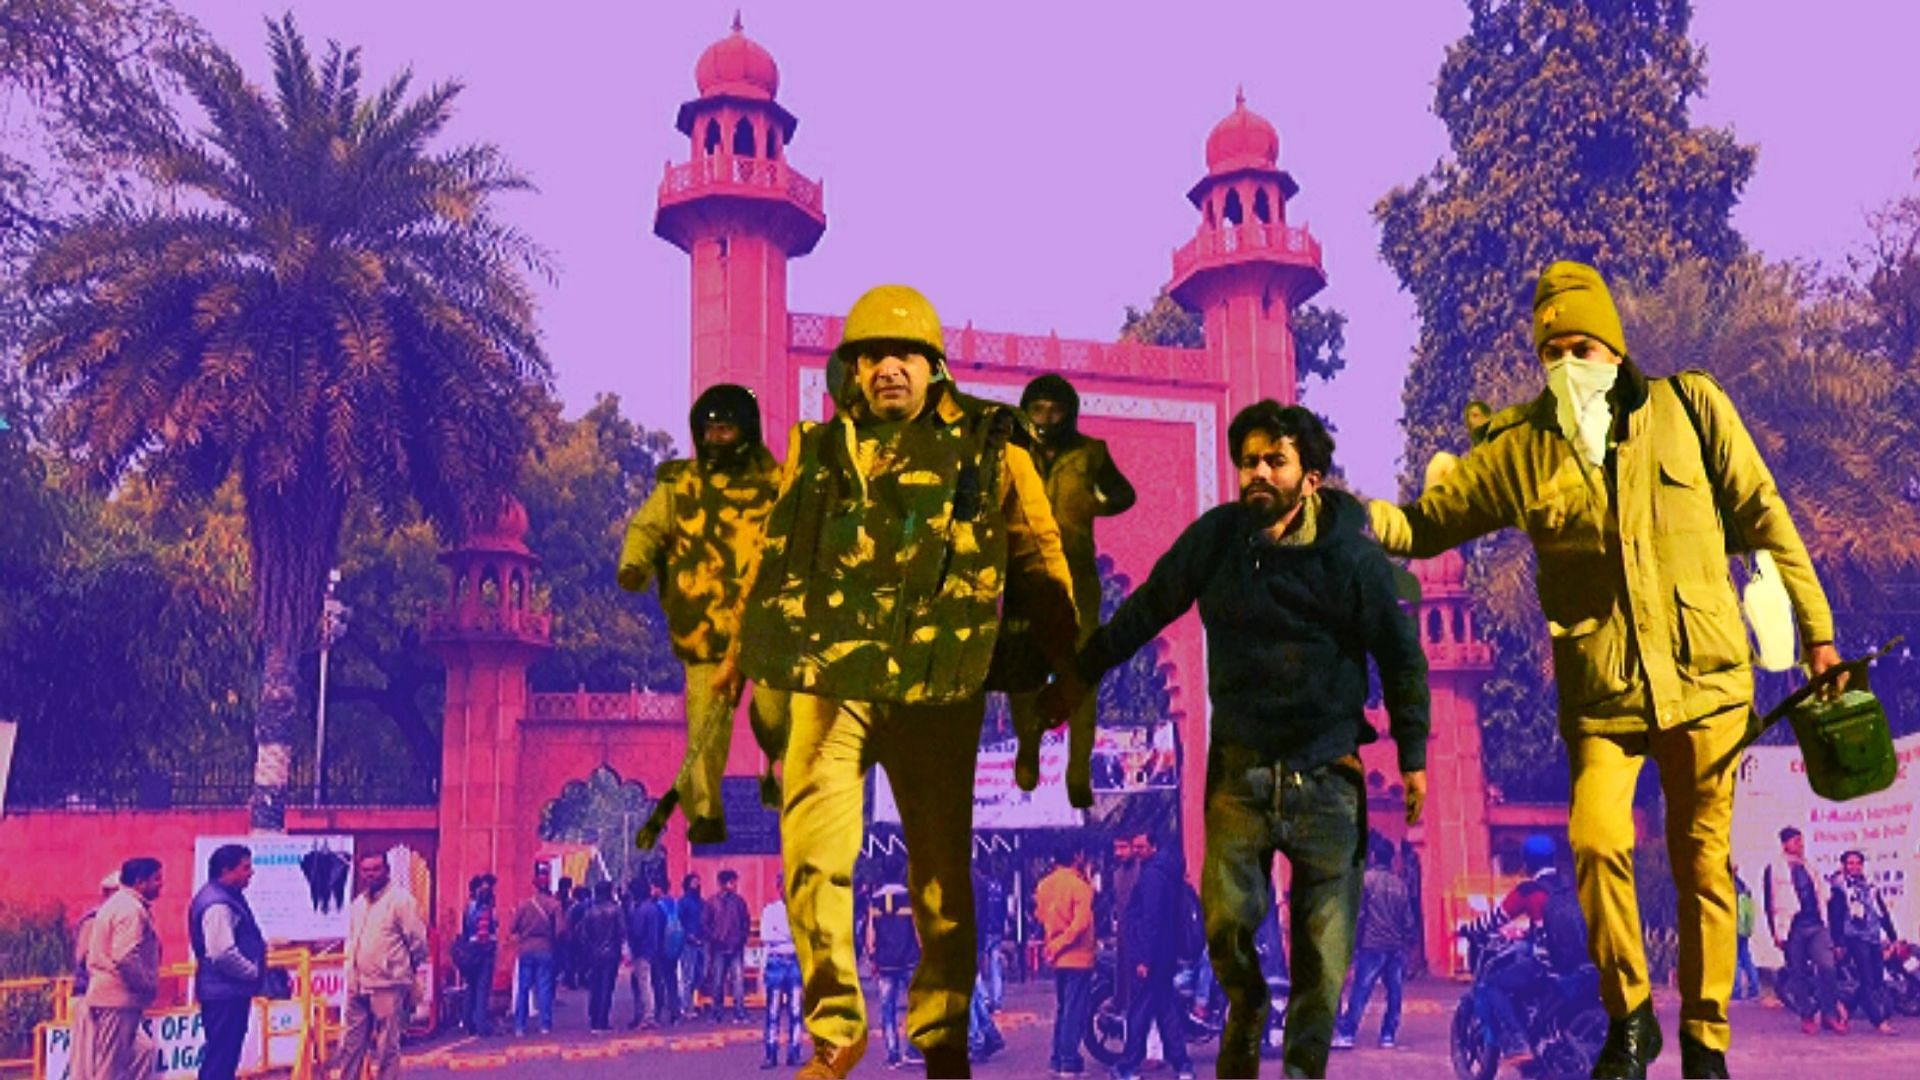  The fact-finding team spoke to students in the hostels in the campus, students admitted in the Jawaharlal Nehru Medical College (JNMCH), AMU security guards and faculty administrators of two residential halls in the AMU campus.&nbsp;